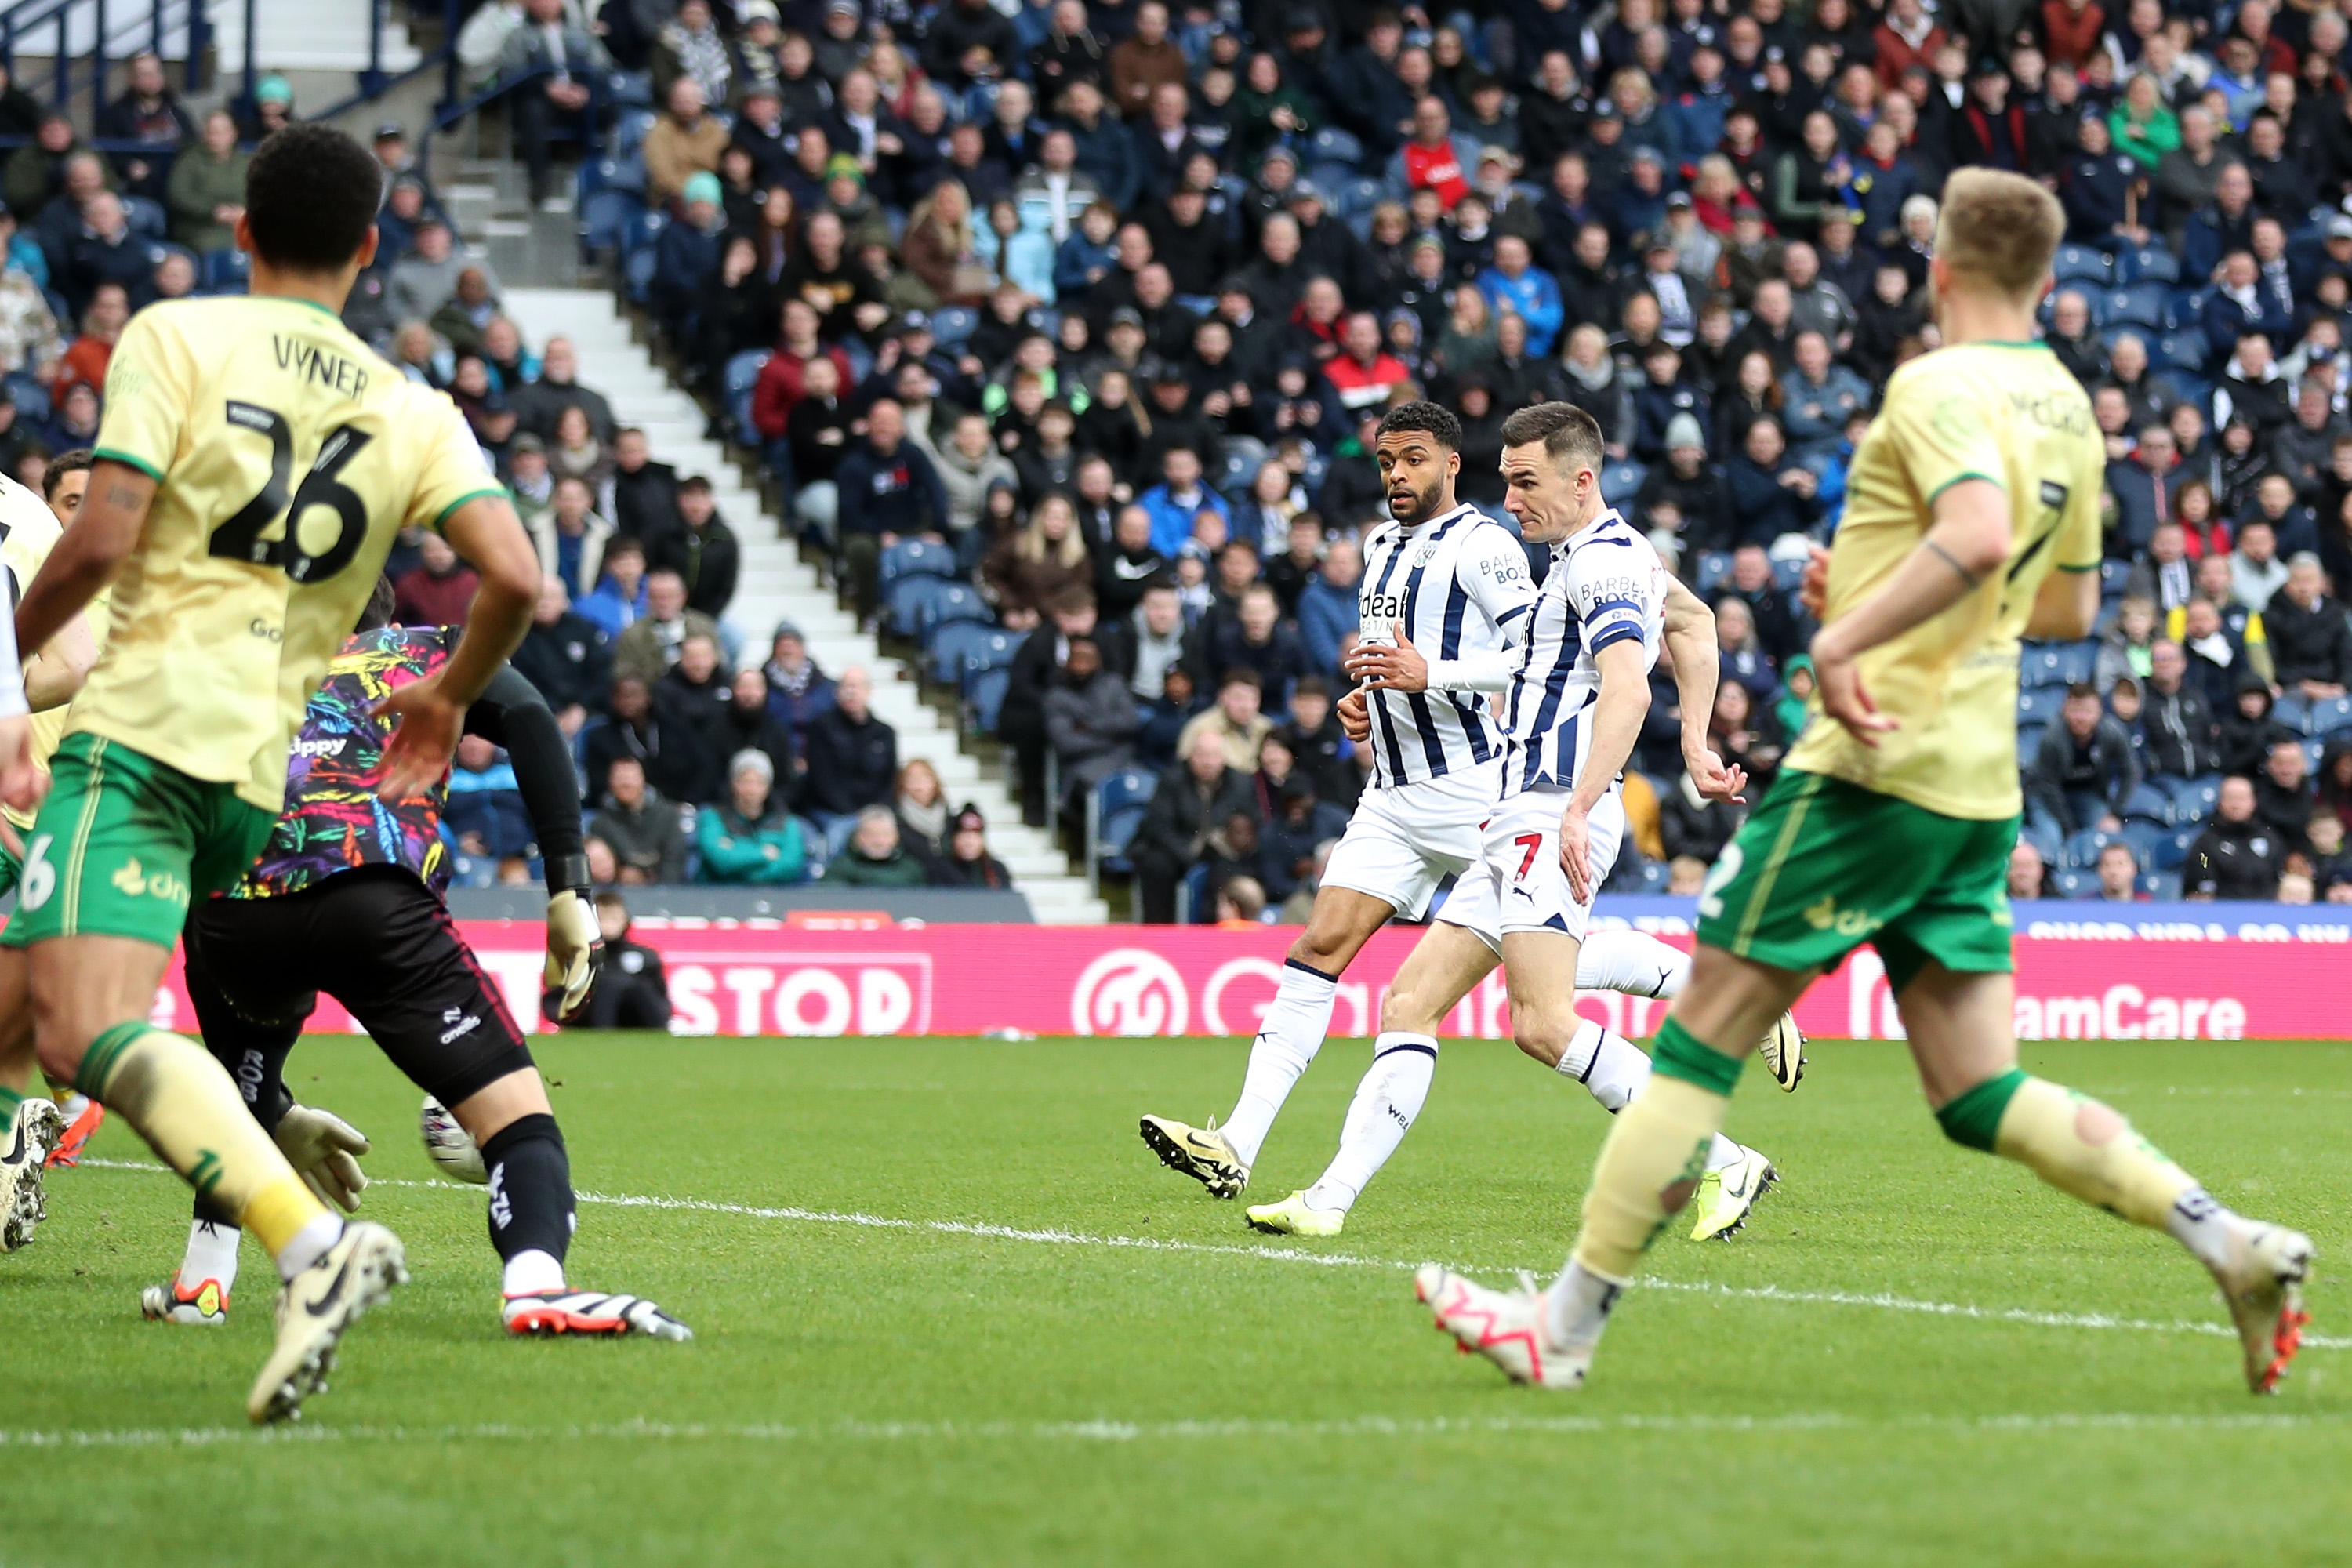 Jed Wallace shoots and scores against Bristol City